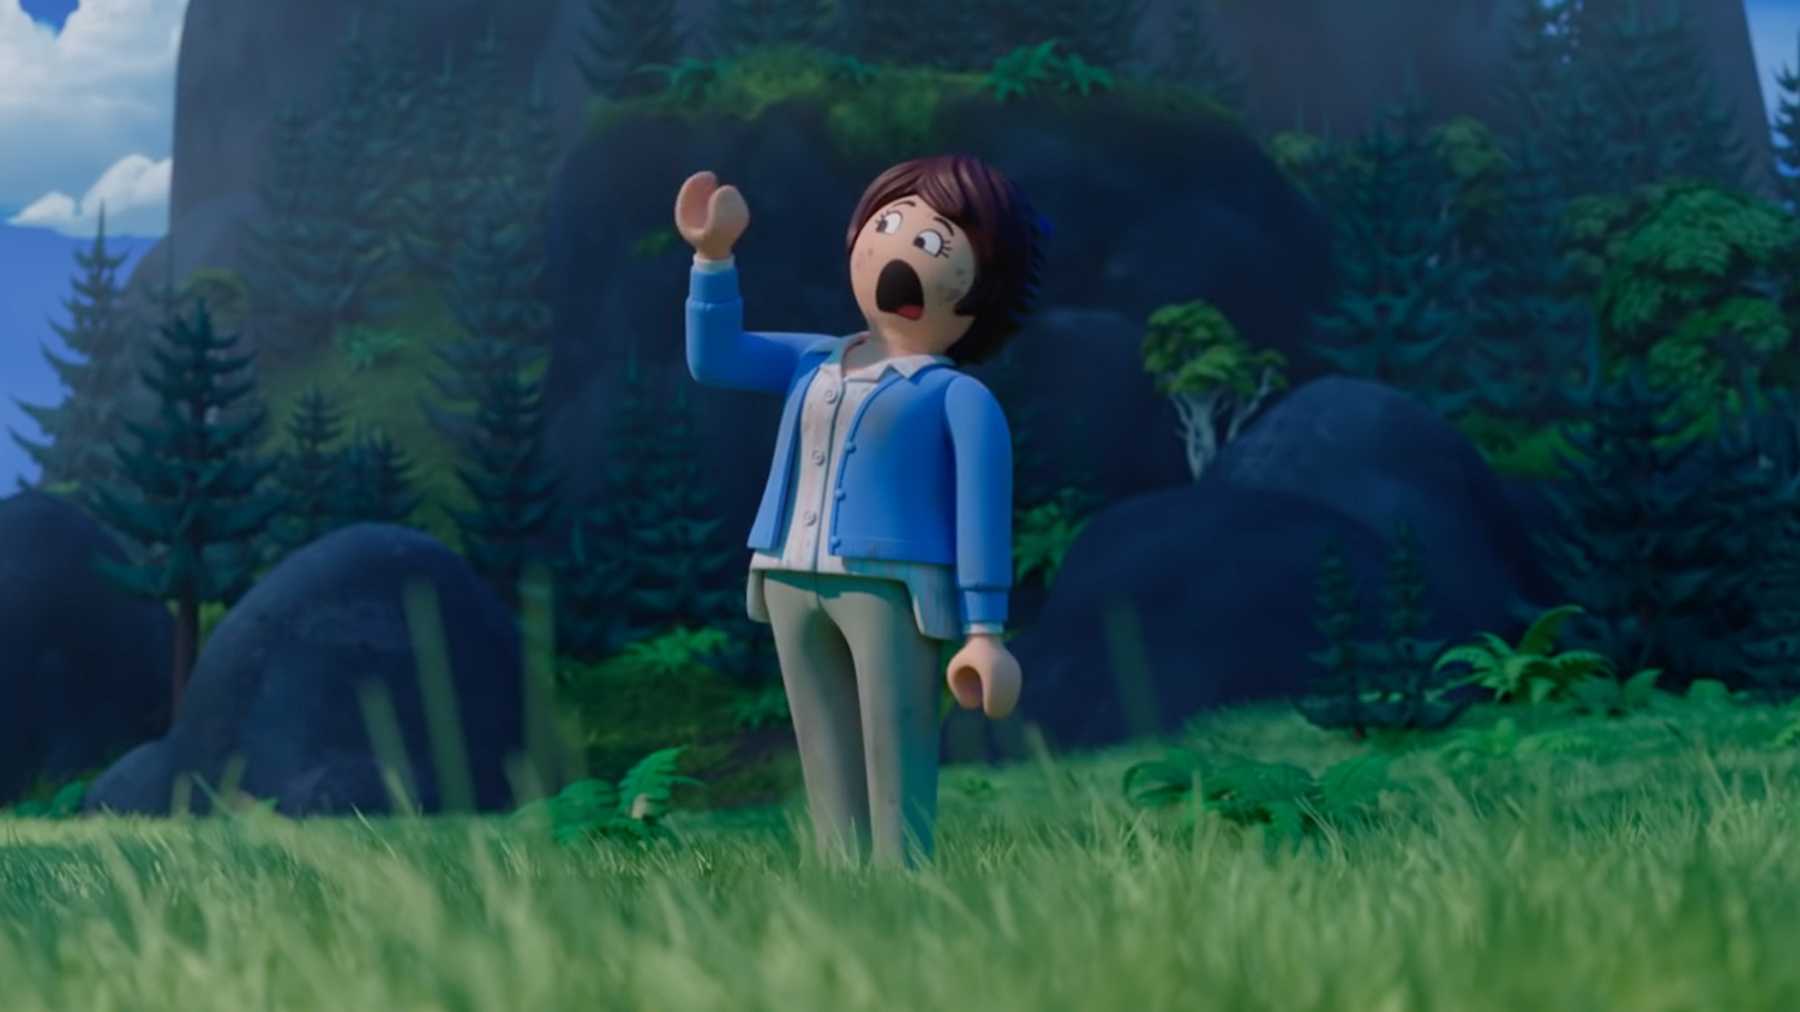 Playmobil: The Movie DVD Review • Home Theater Forum